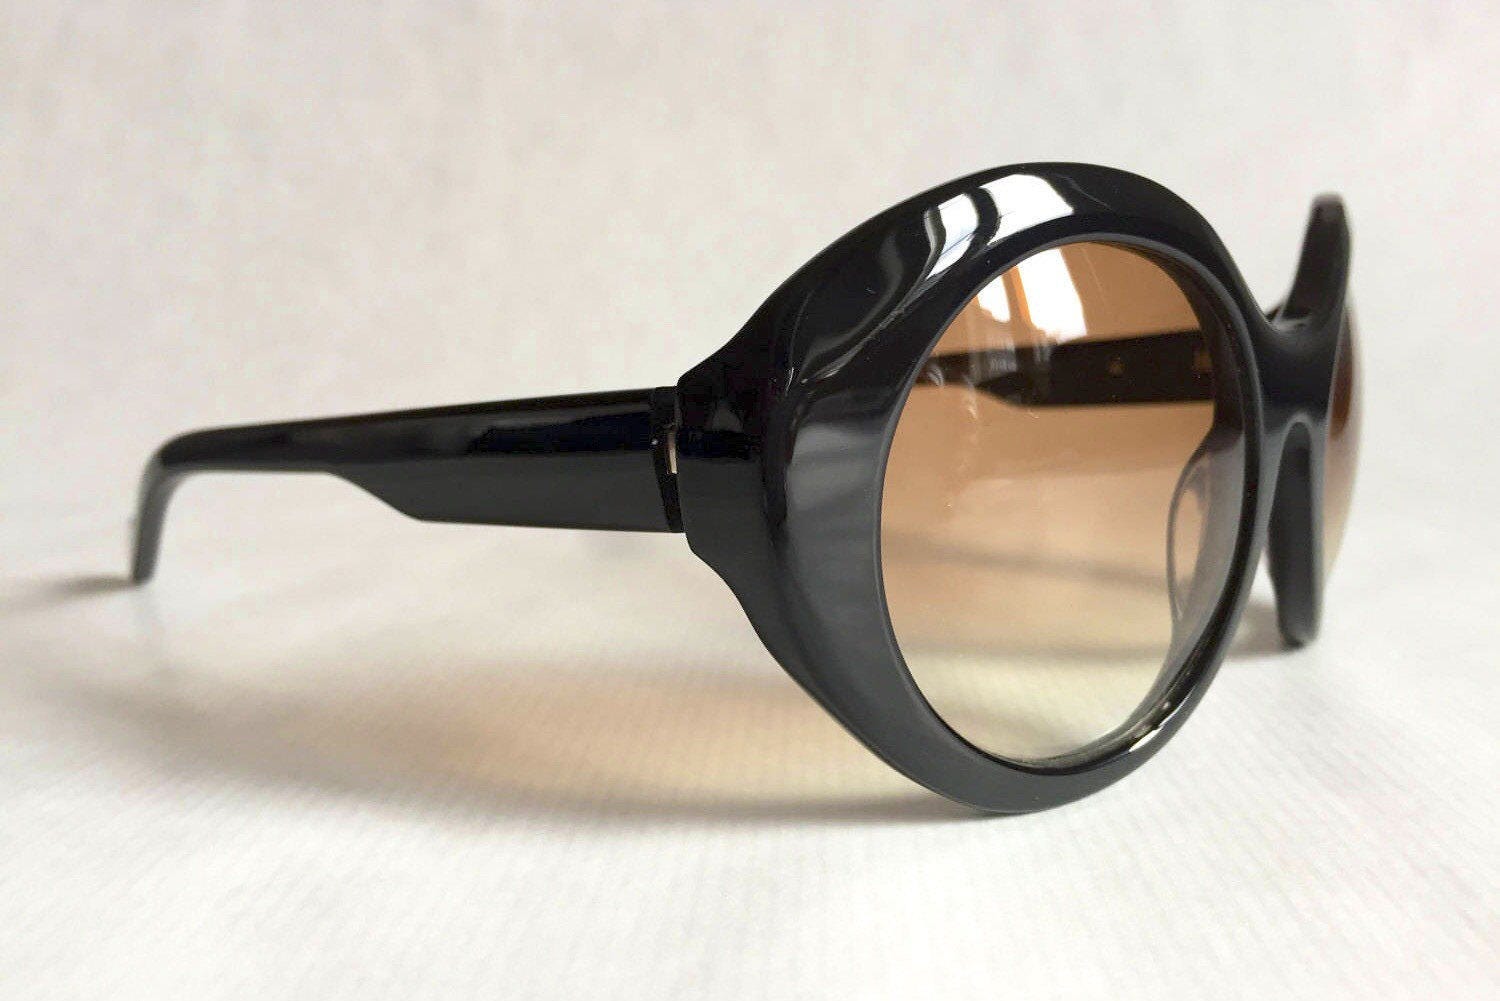 Courreges CL 1512 Vintage Sunglasses Made in France New Old Stock ...